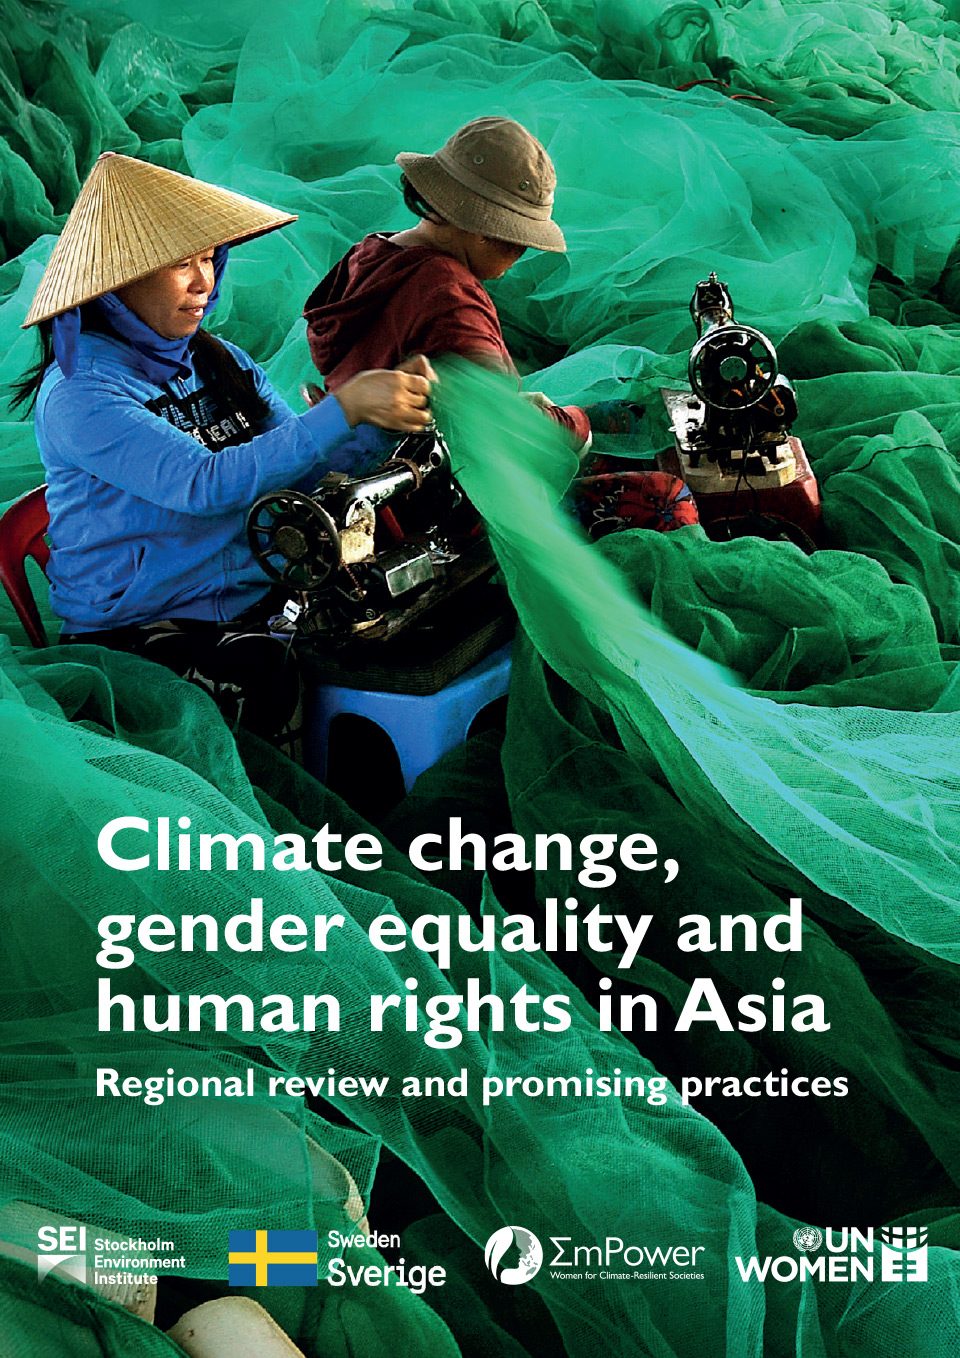 Climate change, gender equality and human rights in Asia - Regional review and promising practices